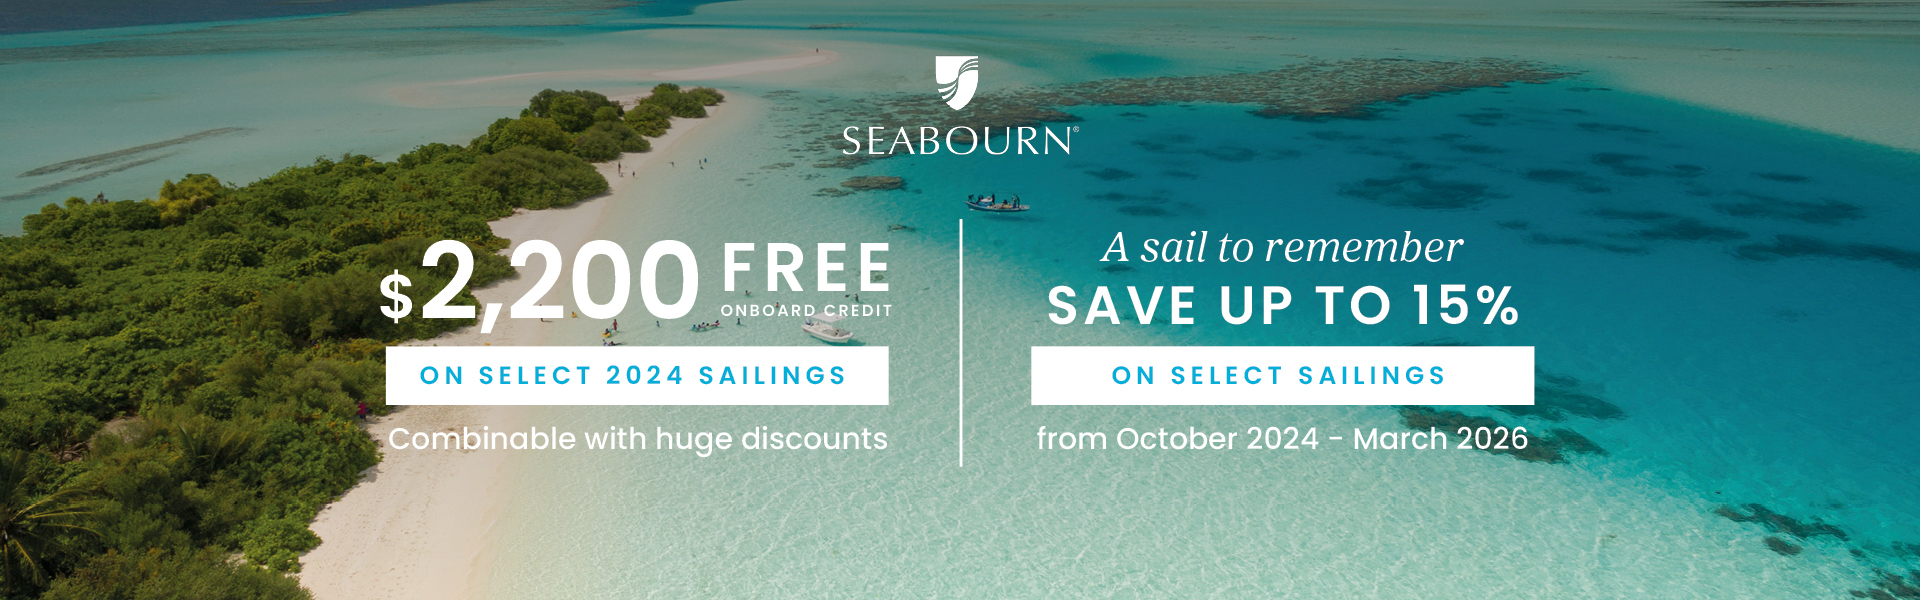 Seabourn Promotion